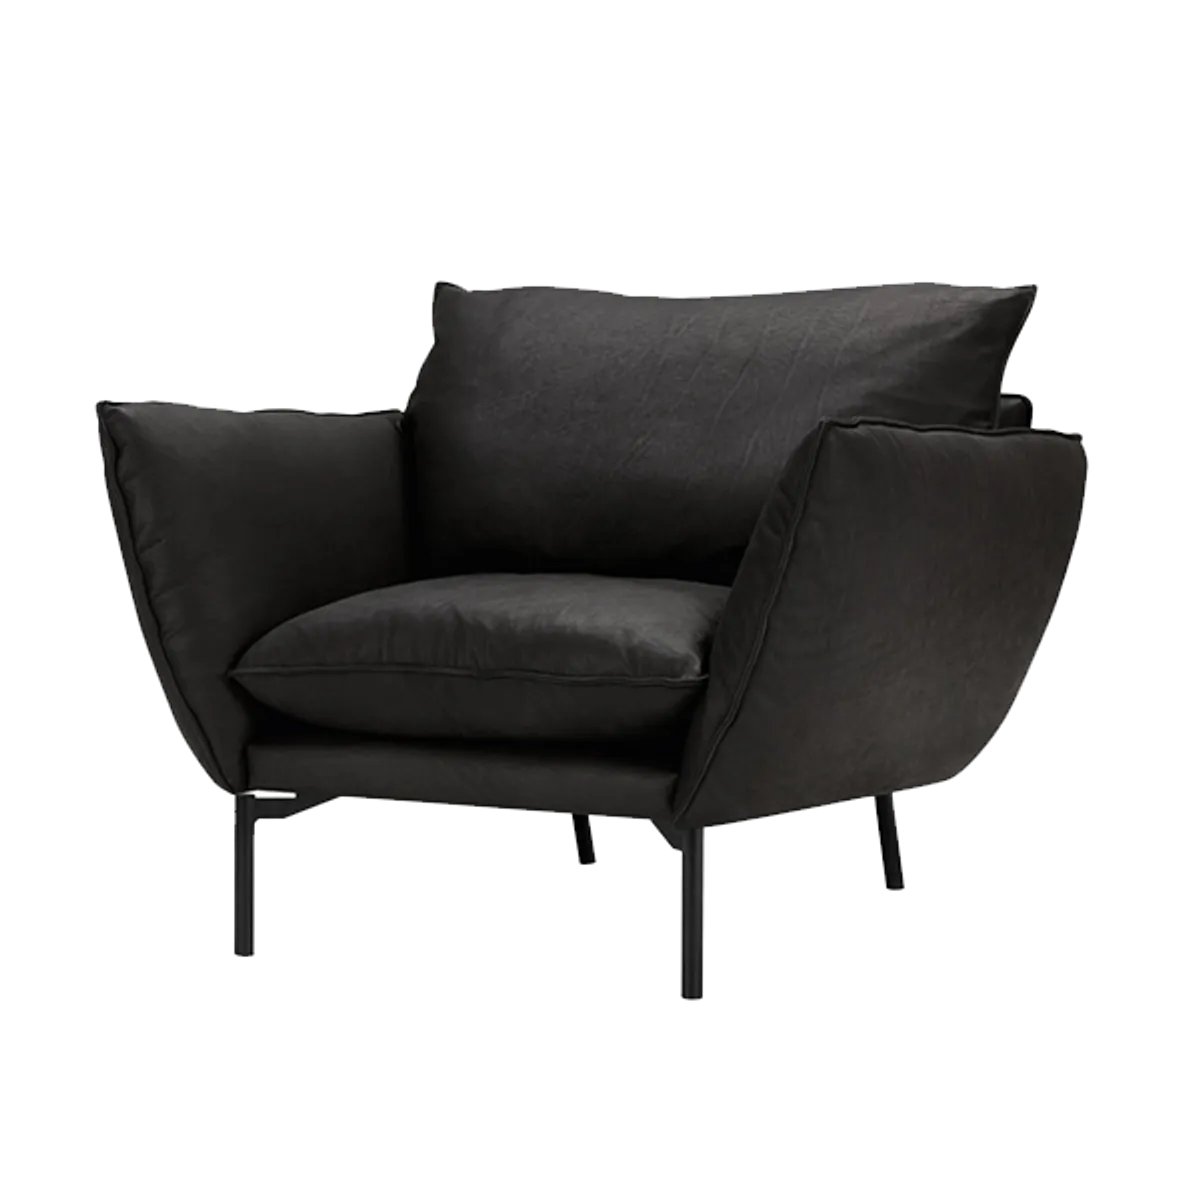 Beagle Lounge Chair Black Leather Inside Out Contracts